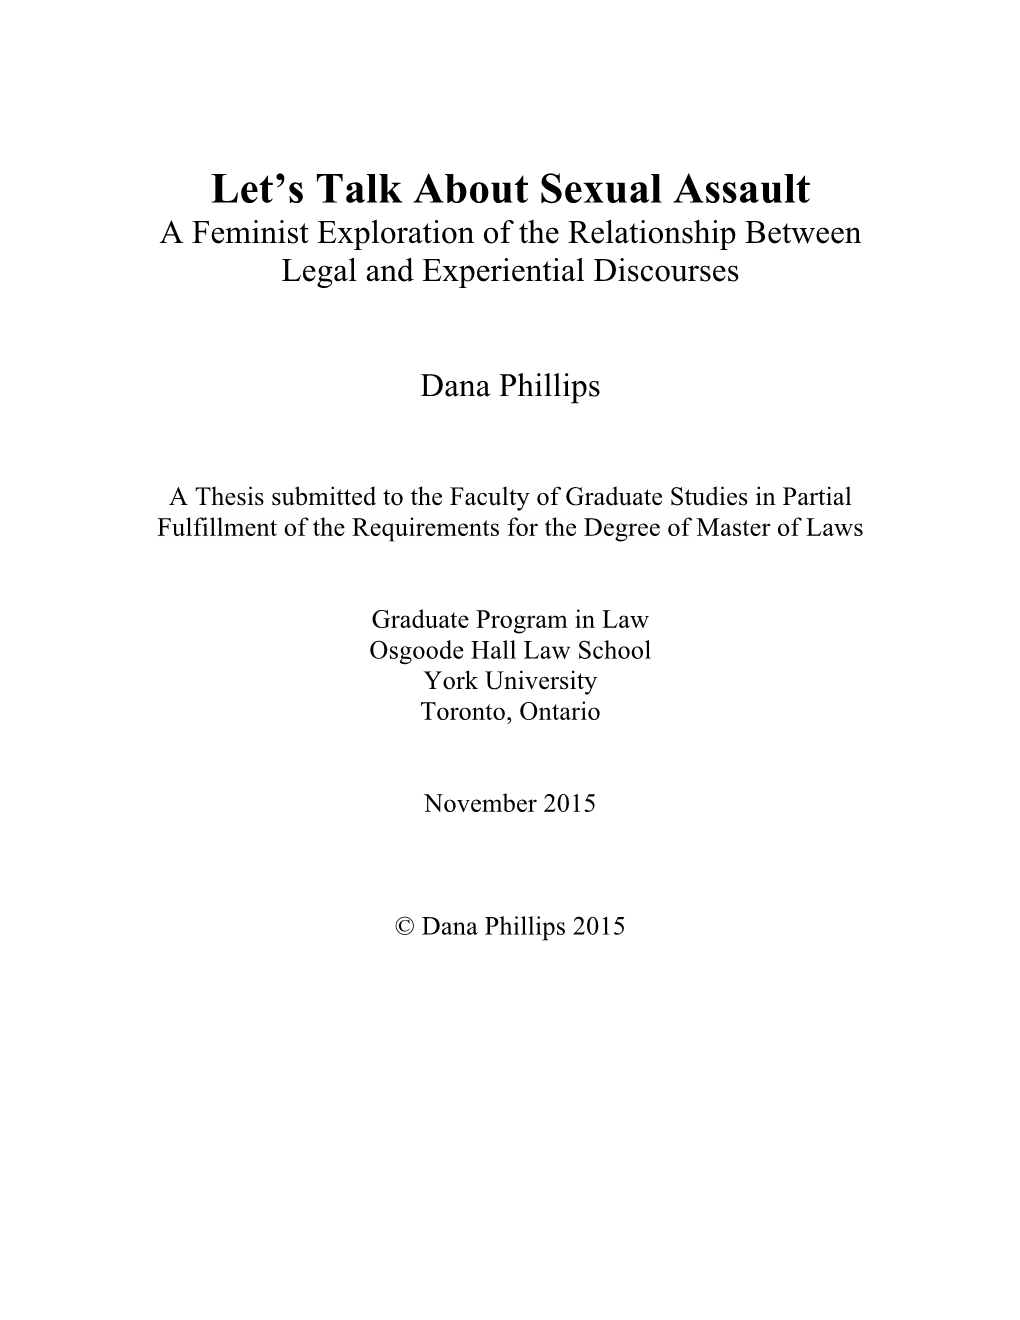 Let's Talk About Sexual Assault